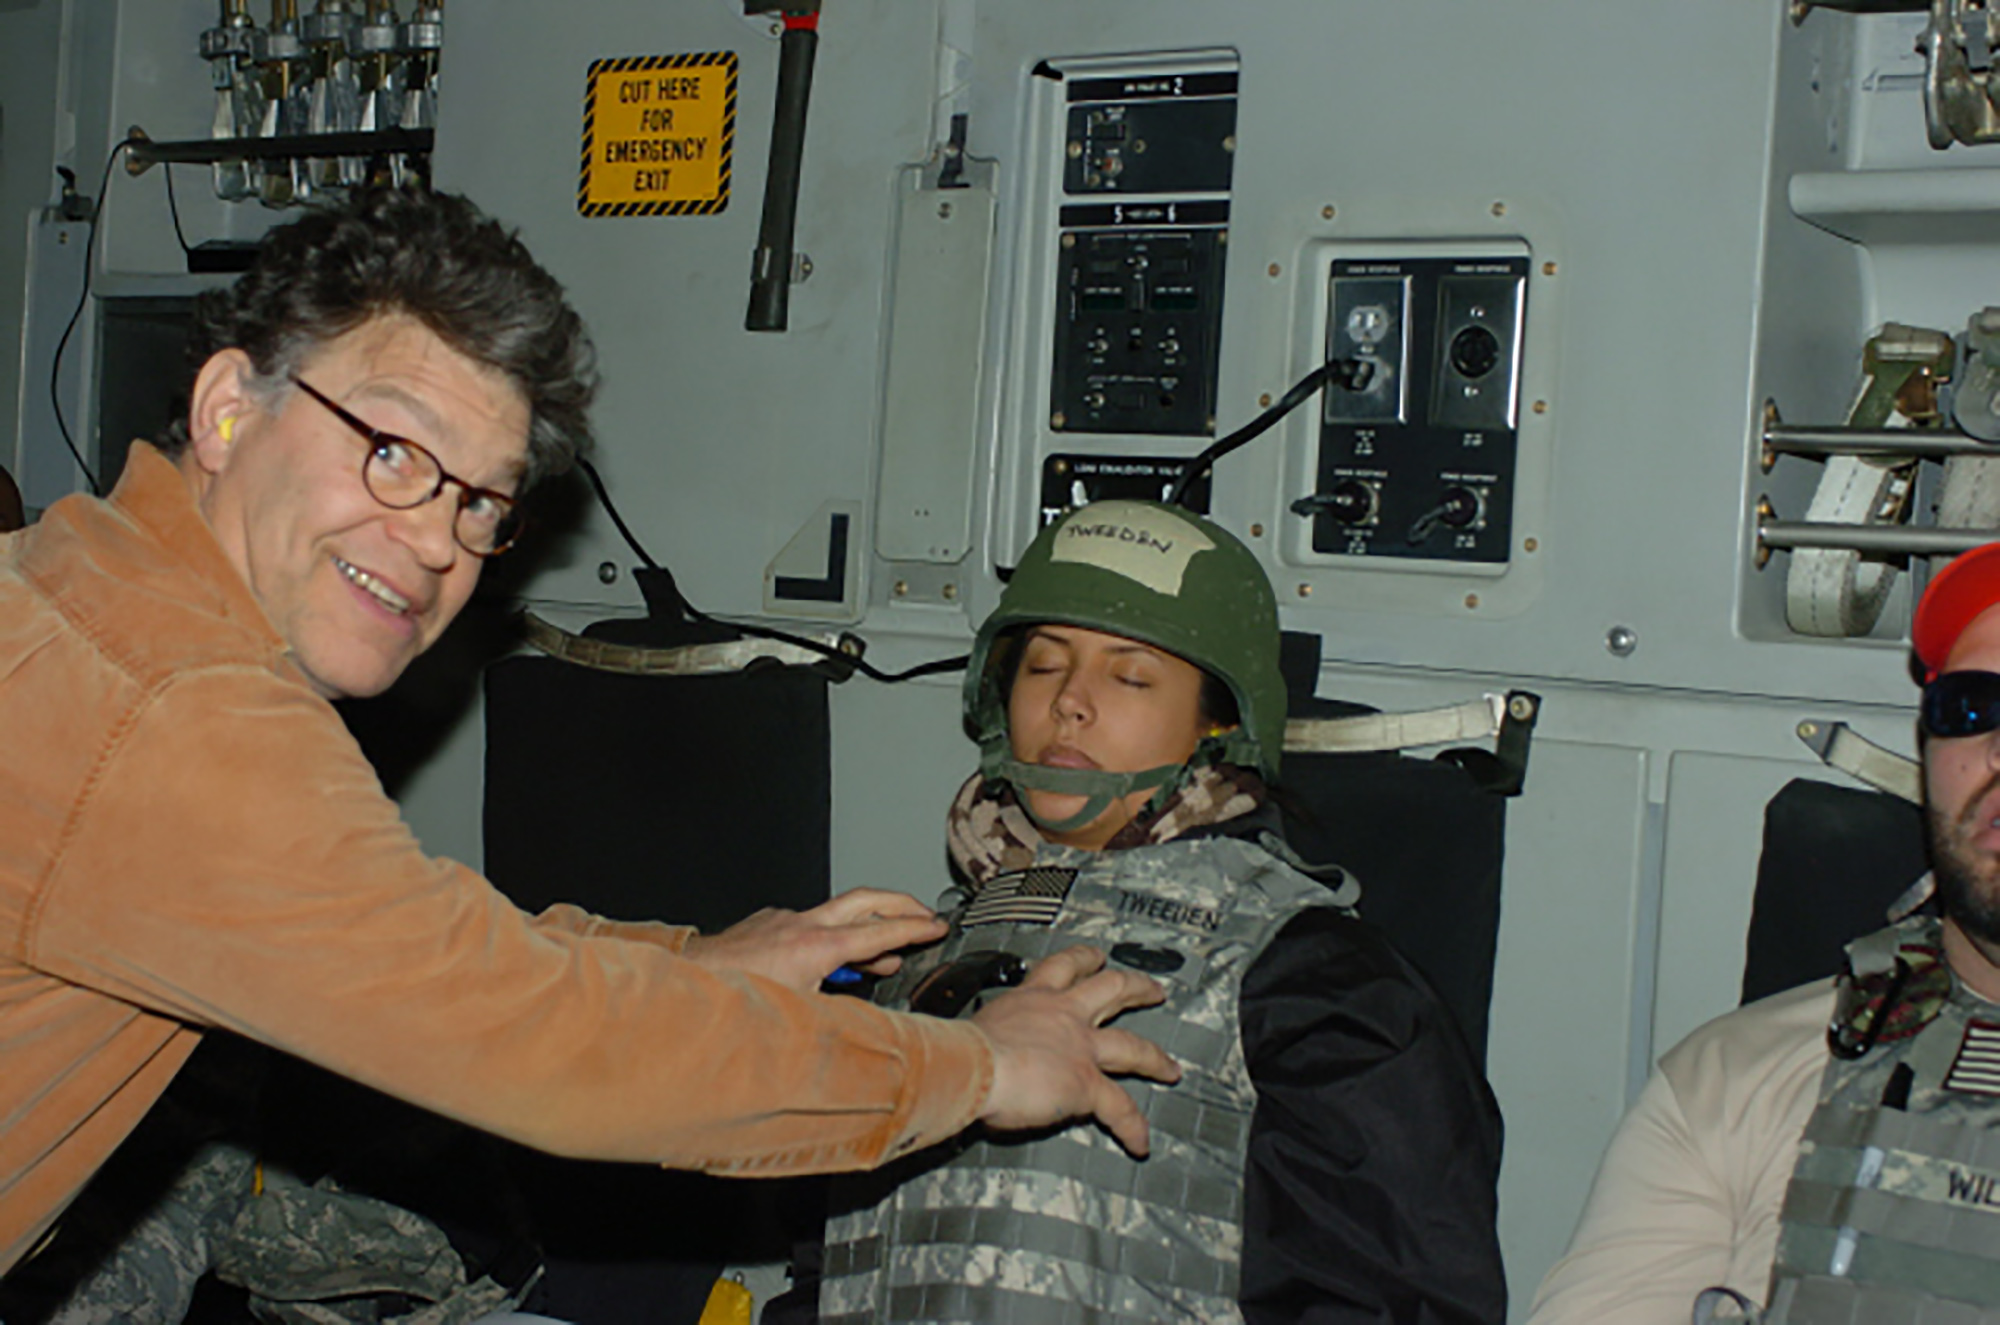 PHOTO: Leeann Tweeden posted this photo online that she says was taken while she was asleep on a flight back from a 2006 USO trip. She says it shows then-comedian Al Franken, who is now a U.S. Senator, groping her.